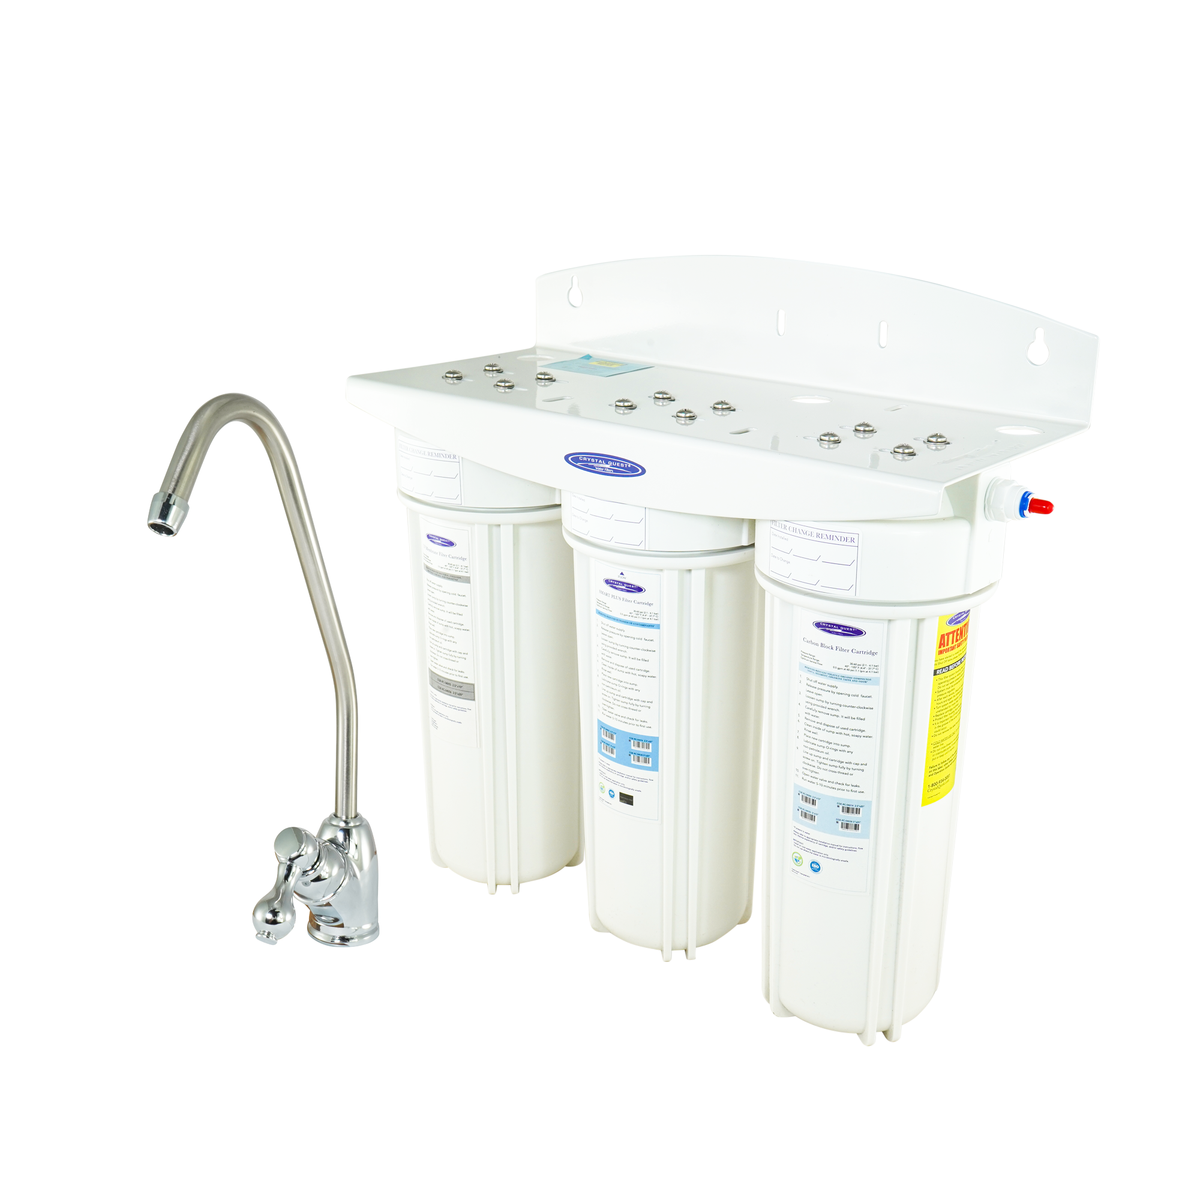 Nitrate Under Sink Water Filter System - Under Sink Water Filters - Crystal Quest